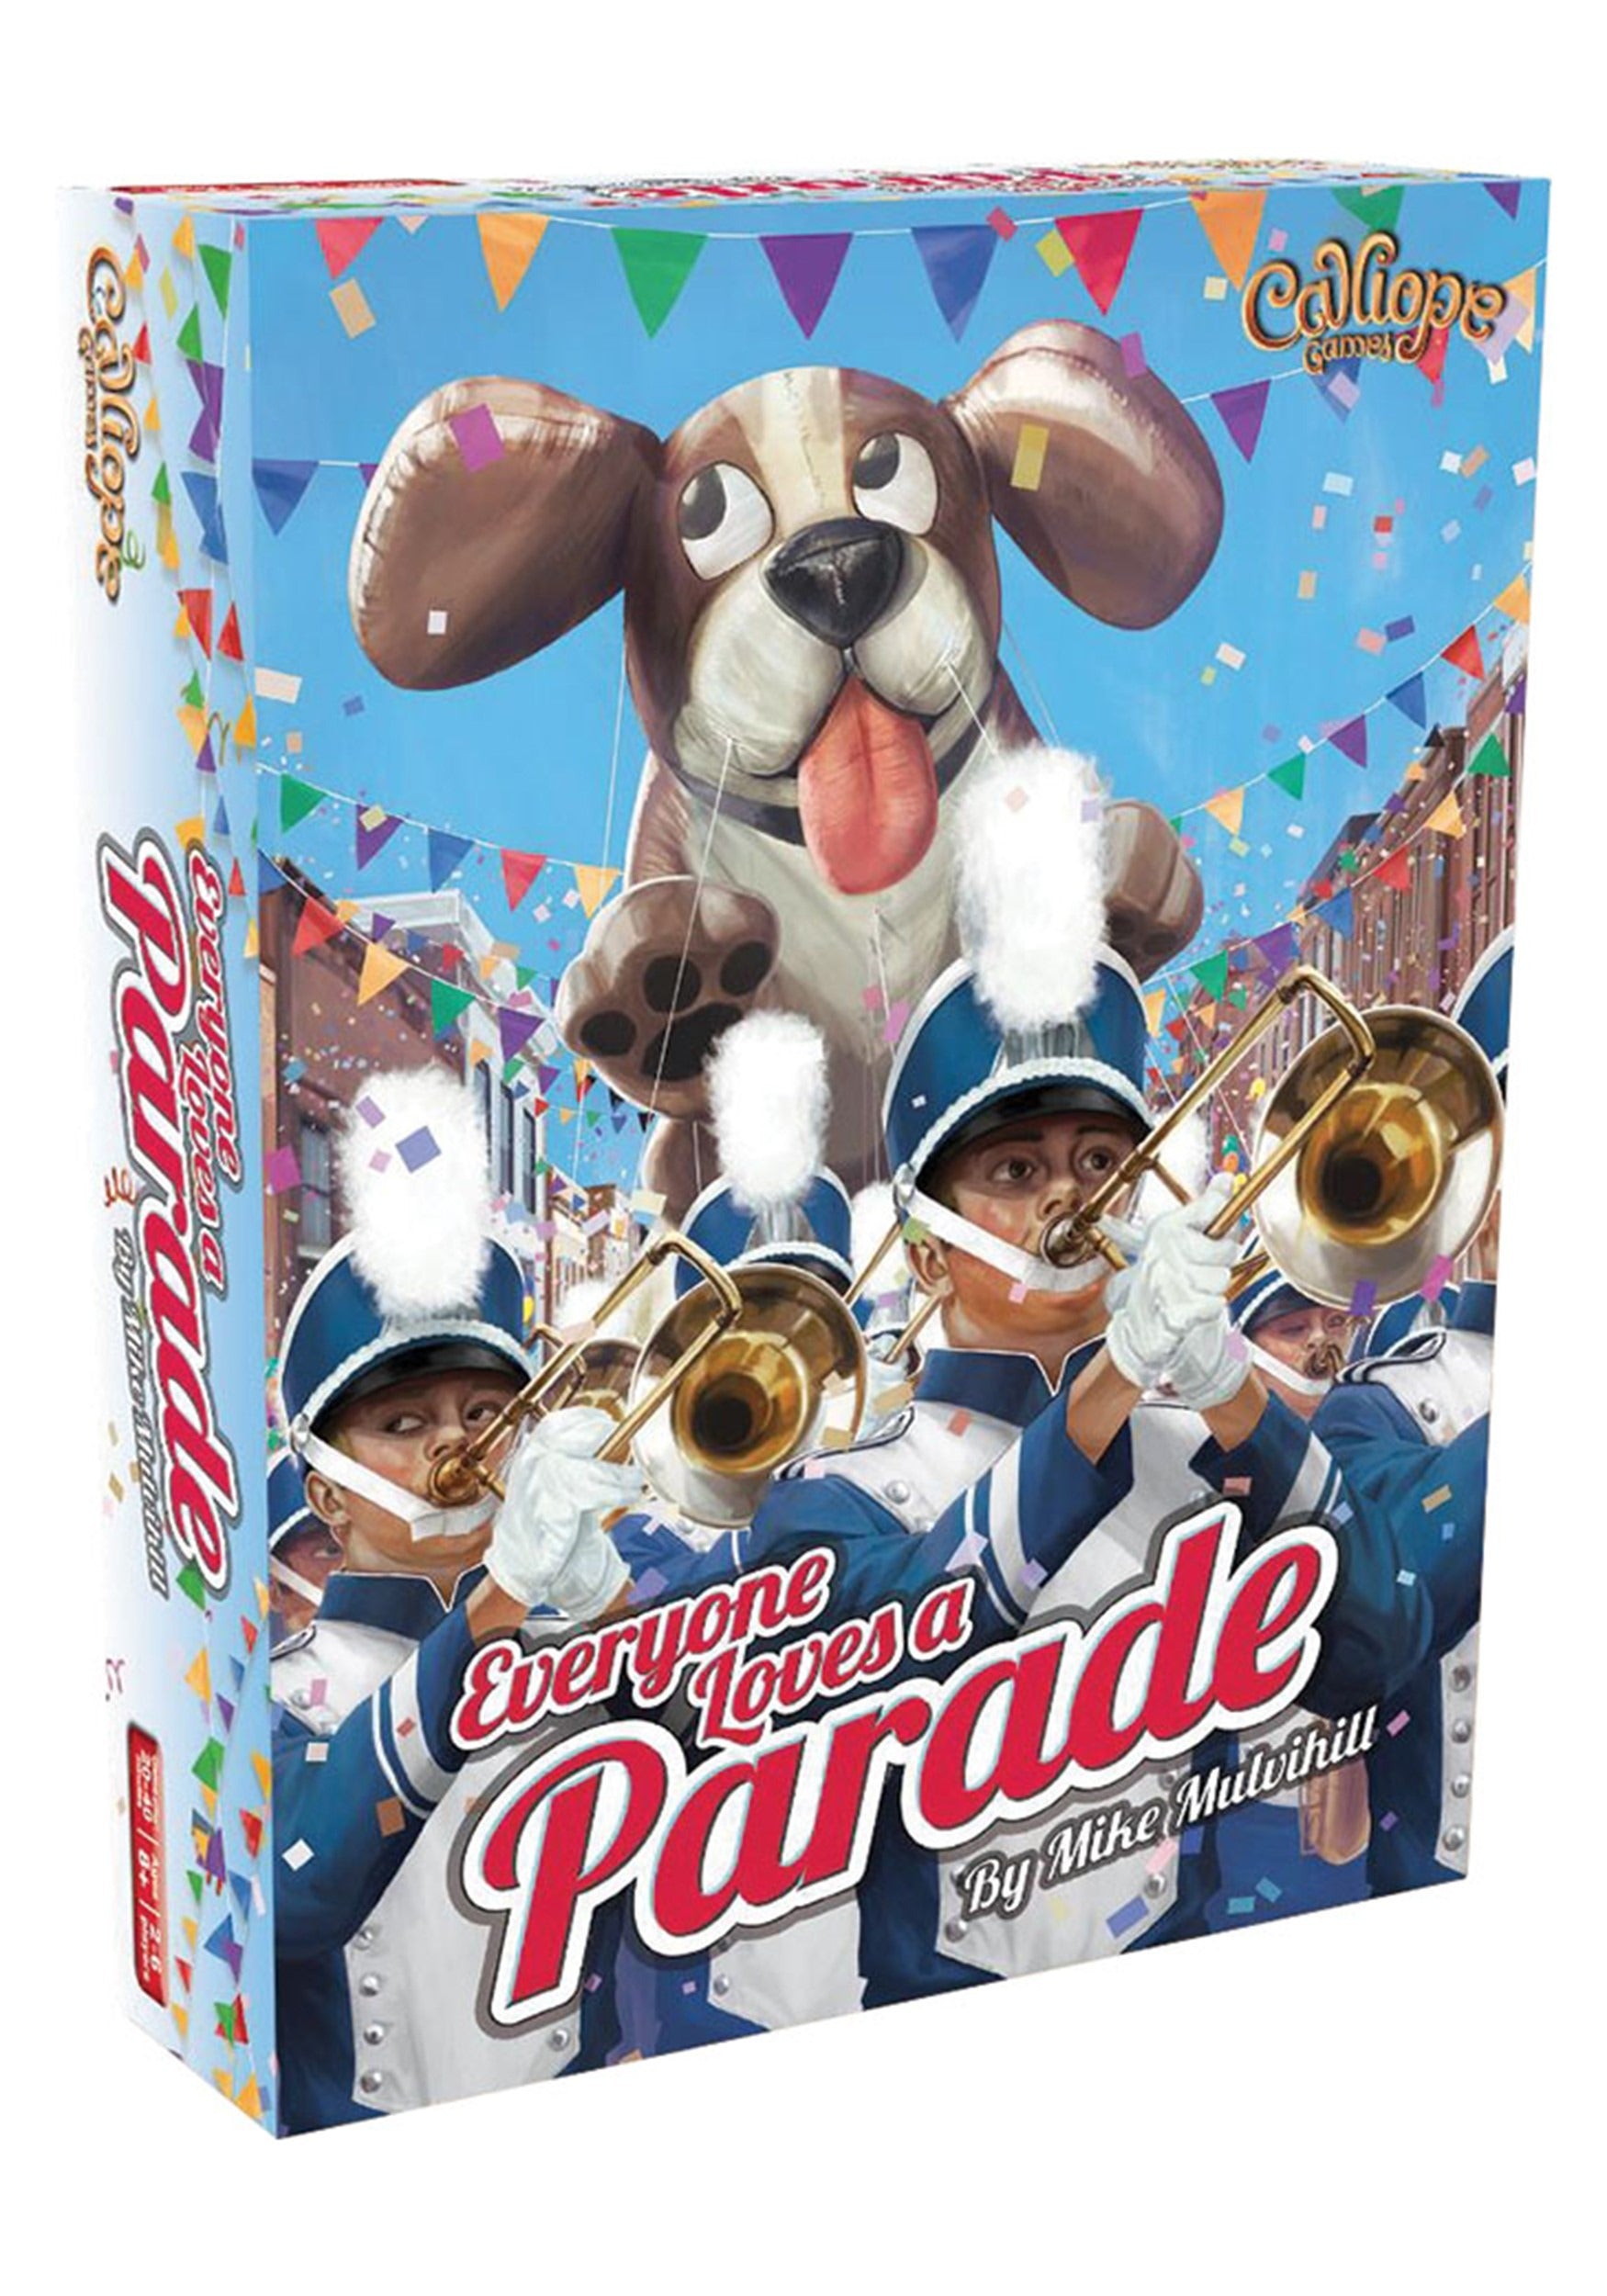 Everyone Loves A Parade product image